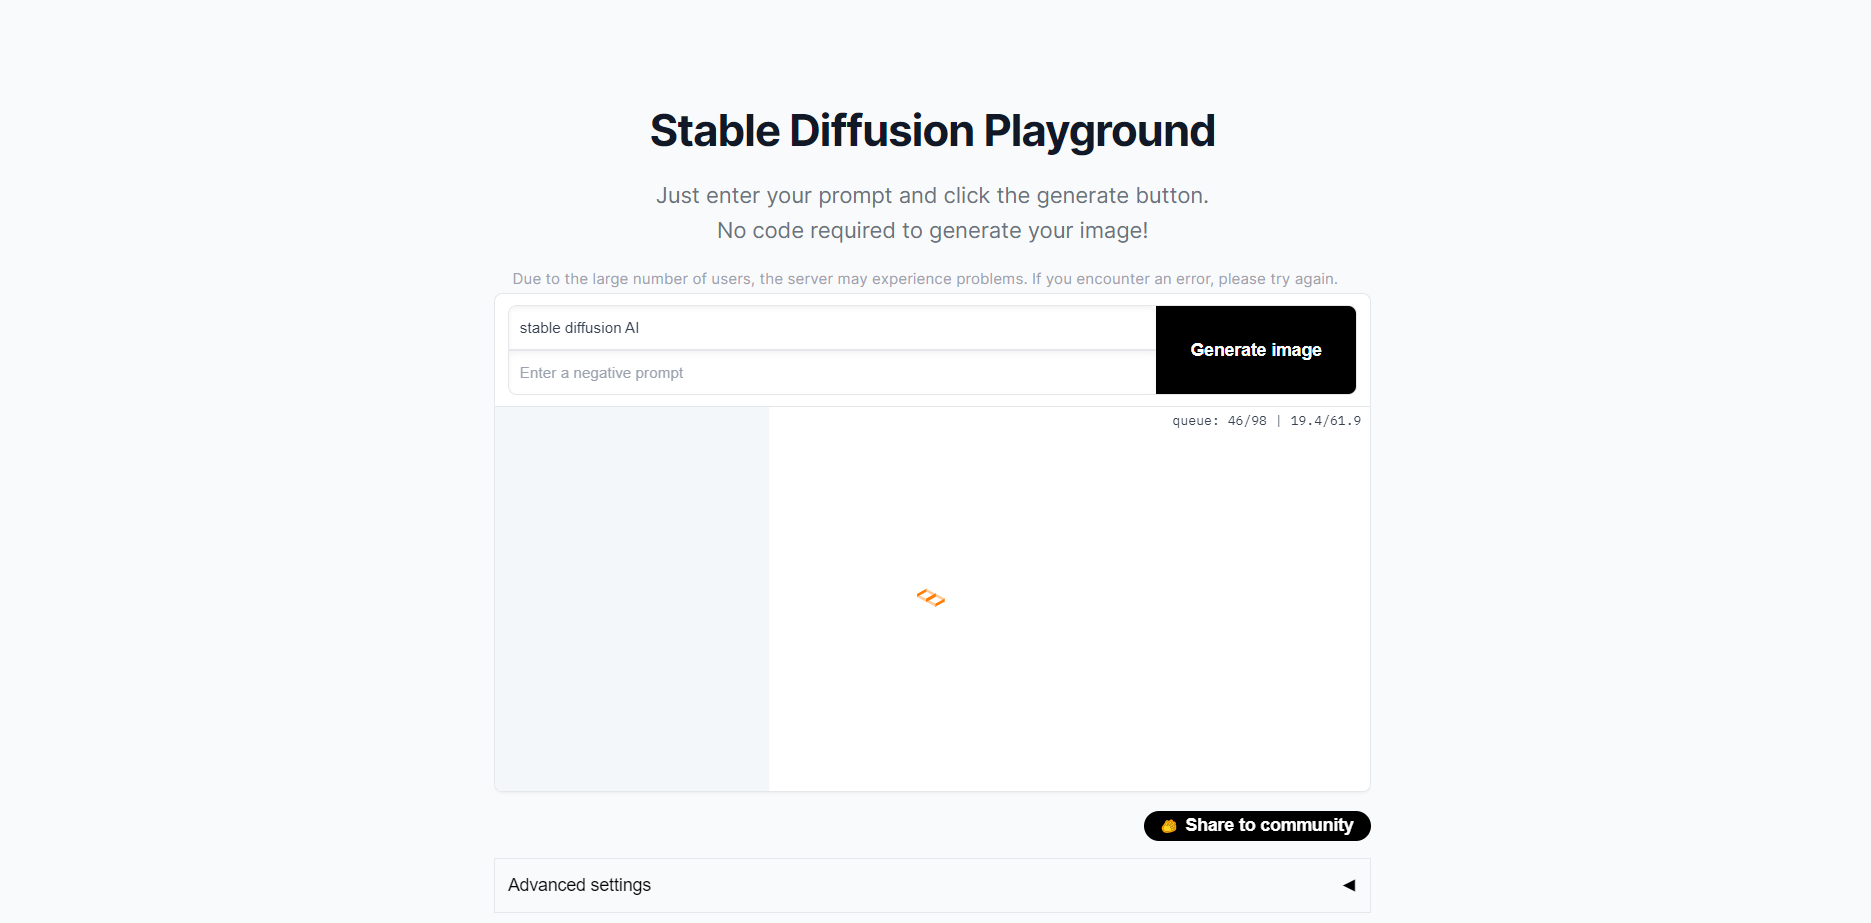 Stable Diffusion Playground landing page.